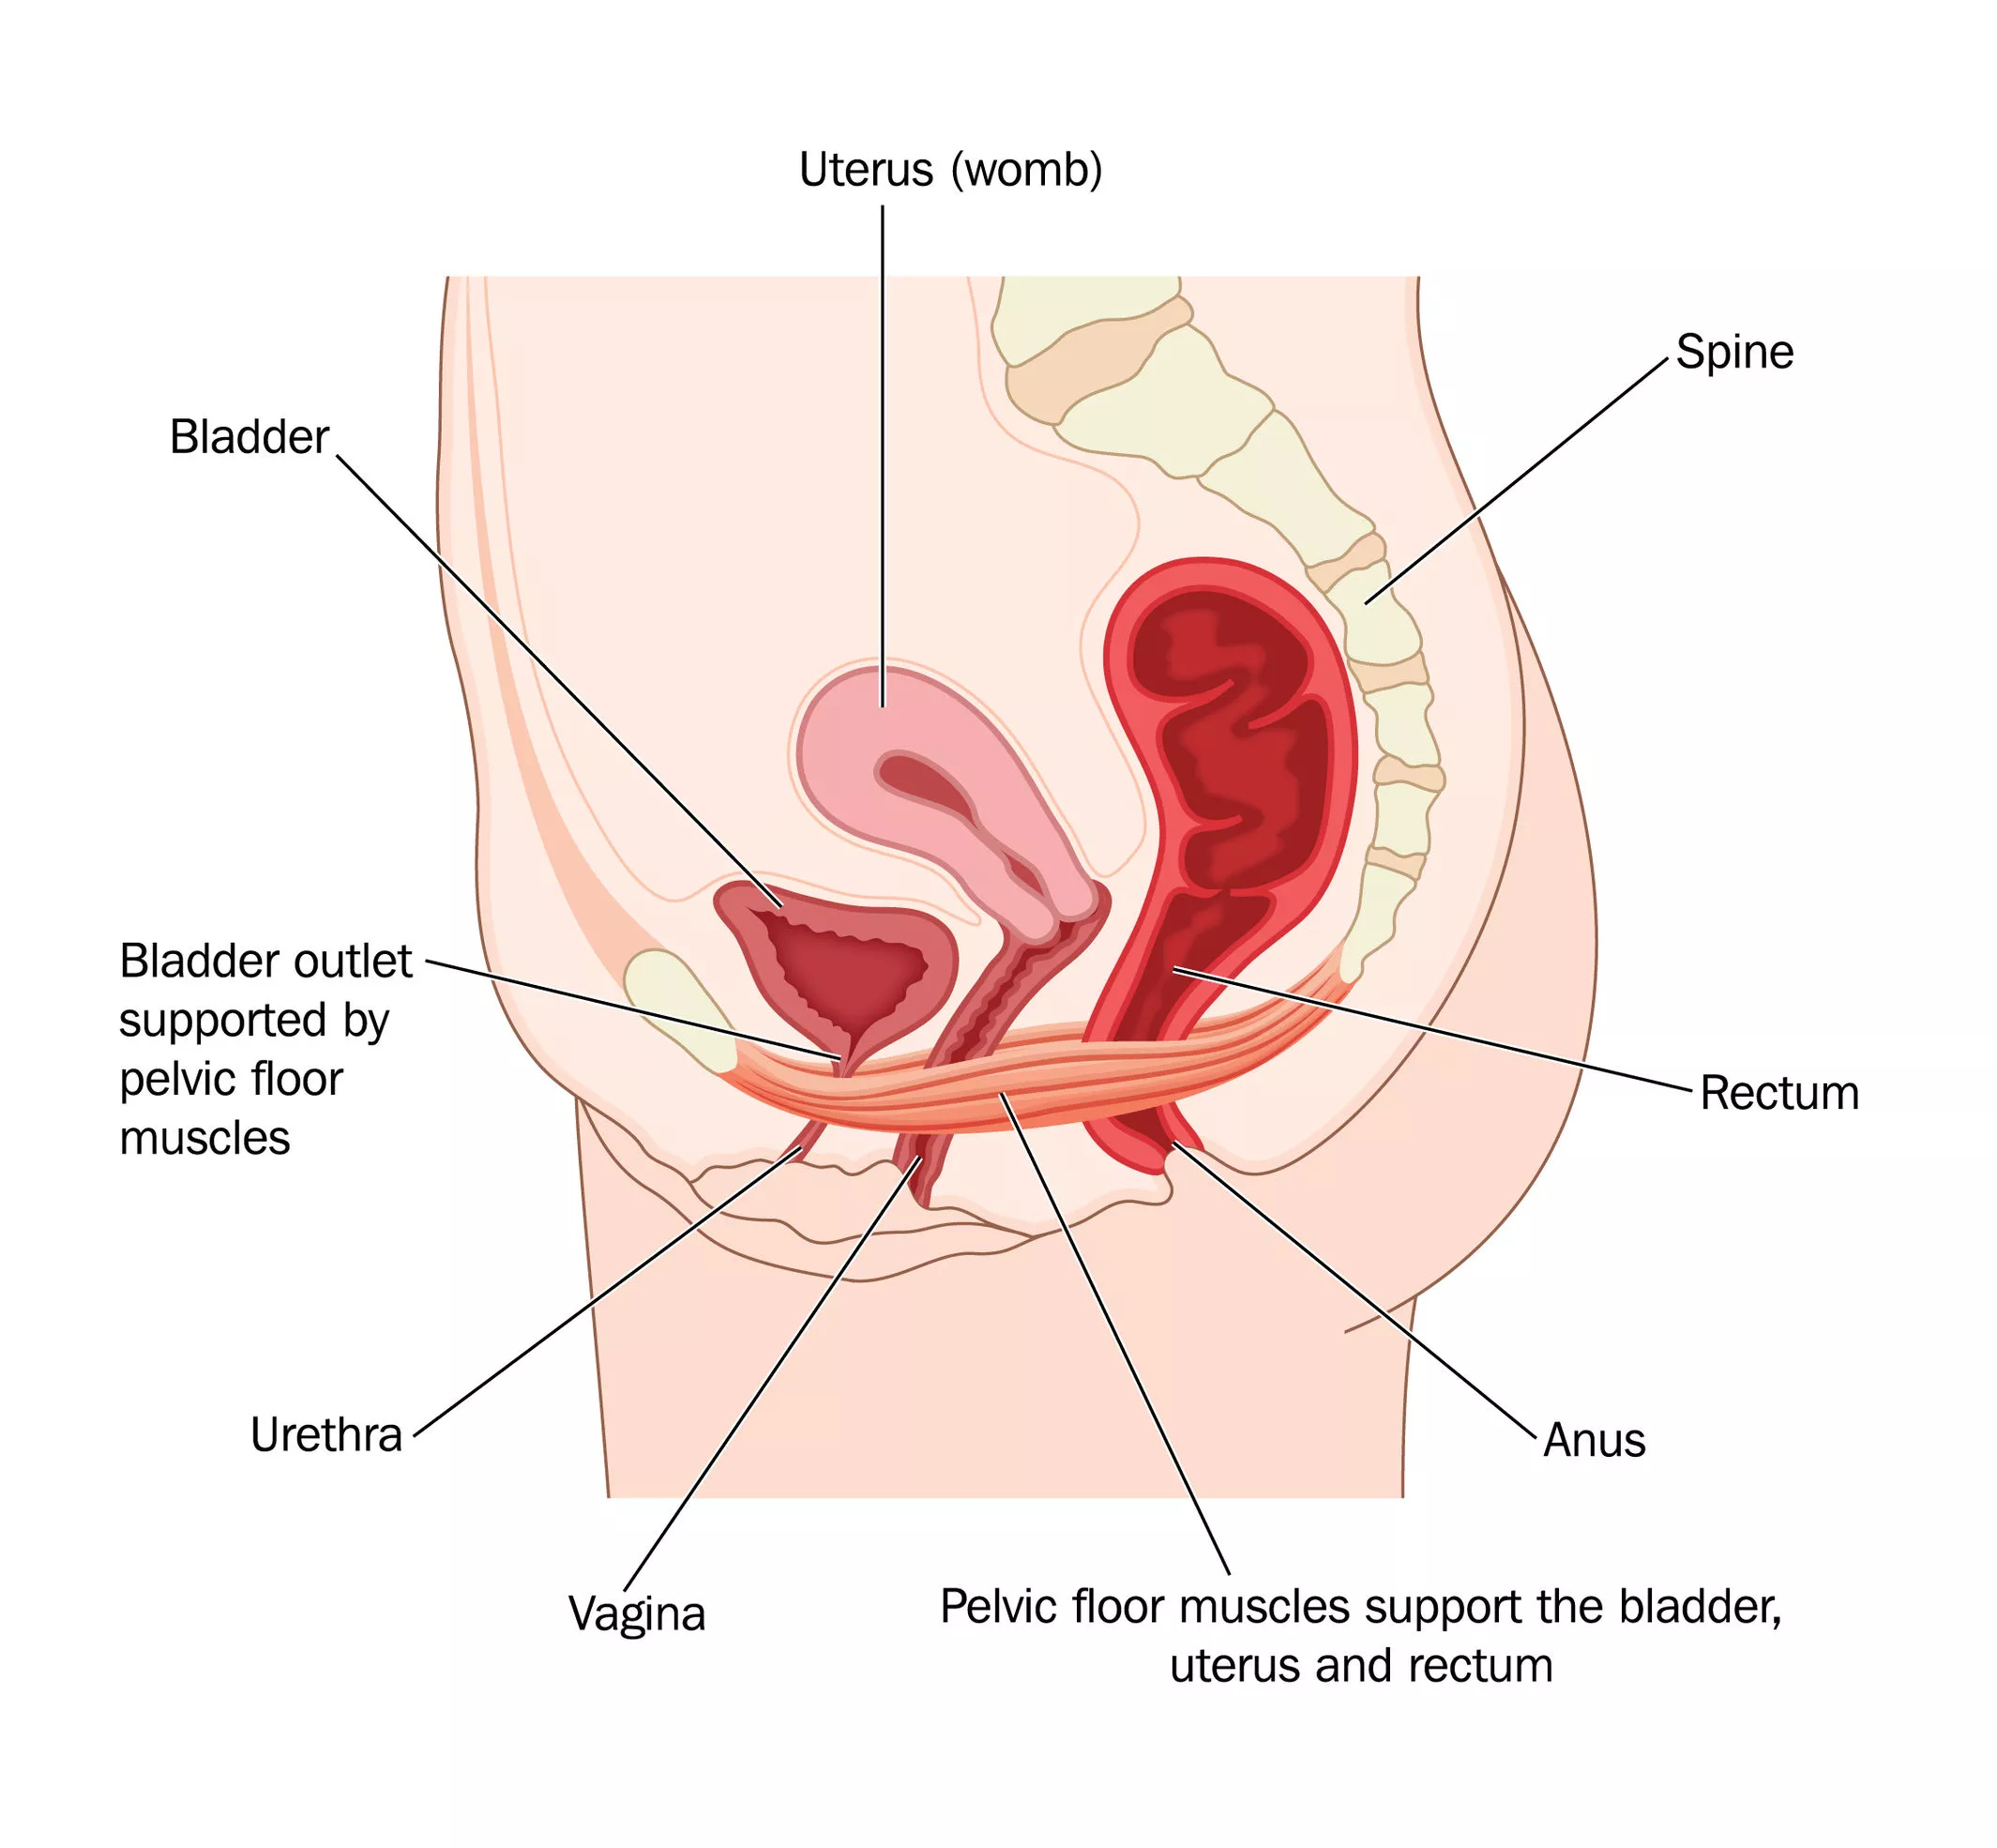 Diagram of Pelvic Floor muscles in the body. | Physio Logic NYC, Brooklyn, NY